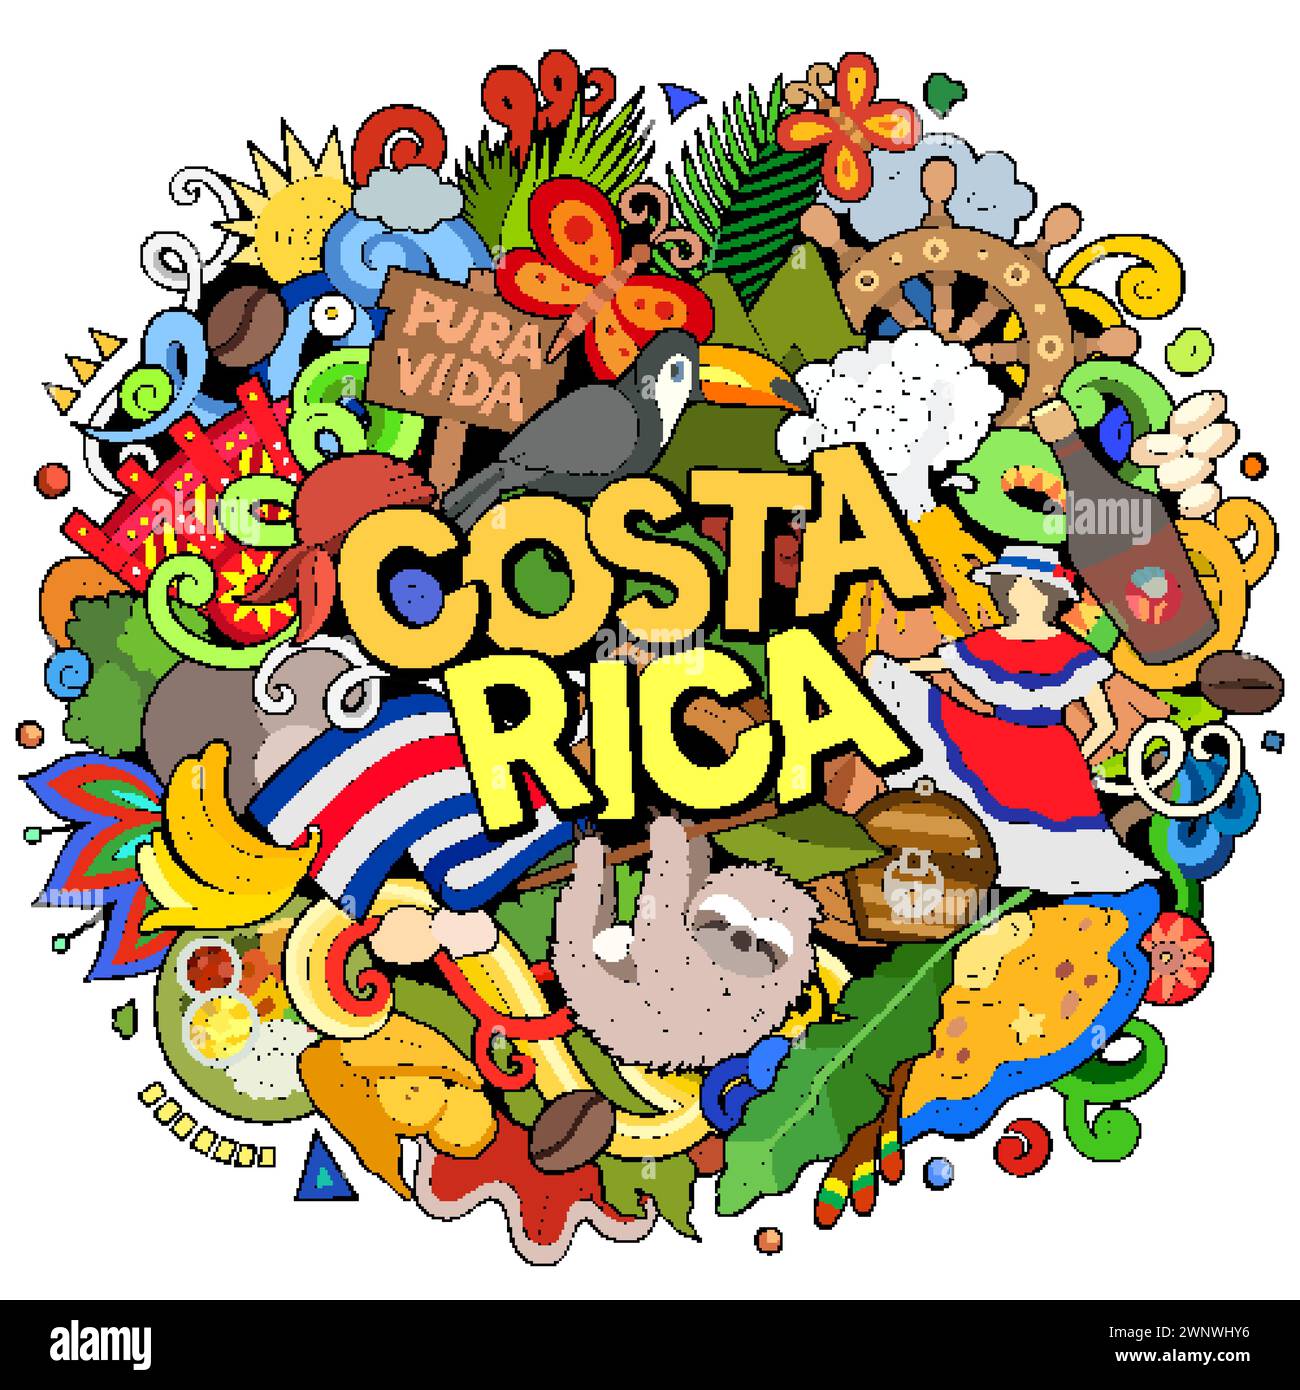 Vector funny doodle illustration with Costa Rica theme. Vibrant and eye-catching design, capturing the essence of Central America culture and traditio Stock Vector